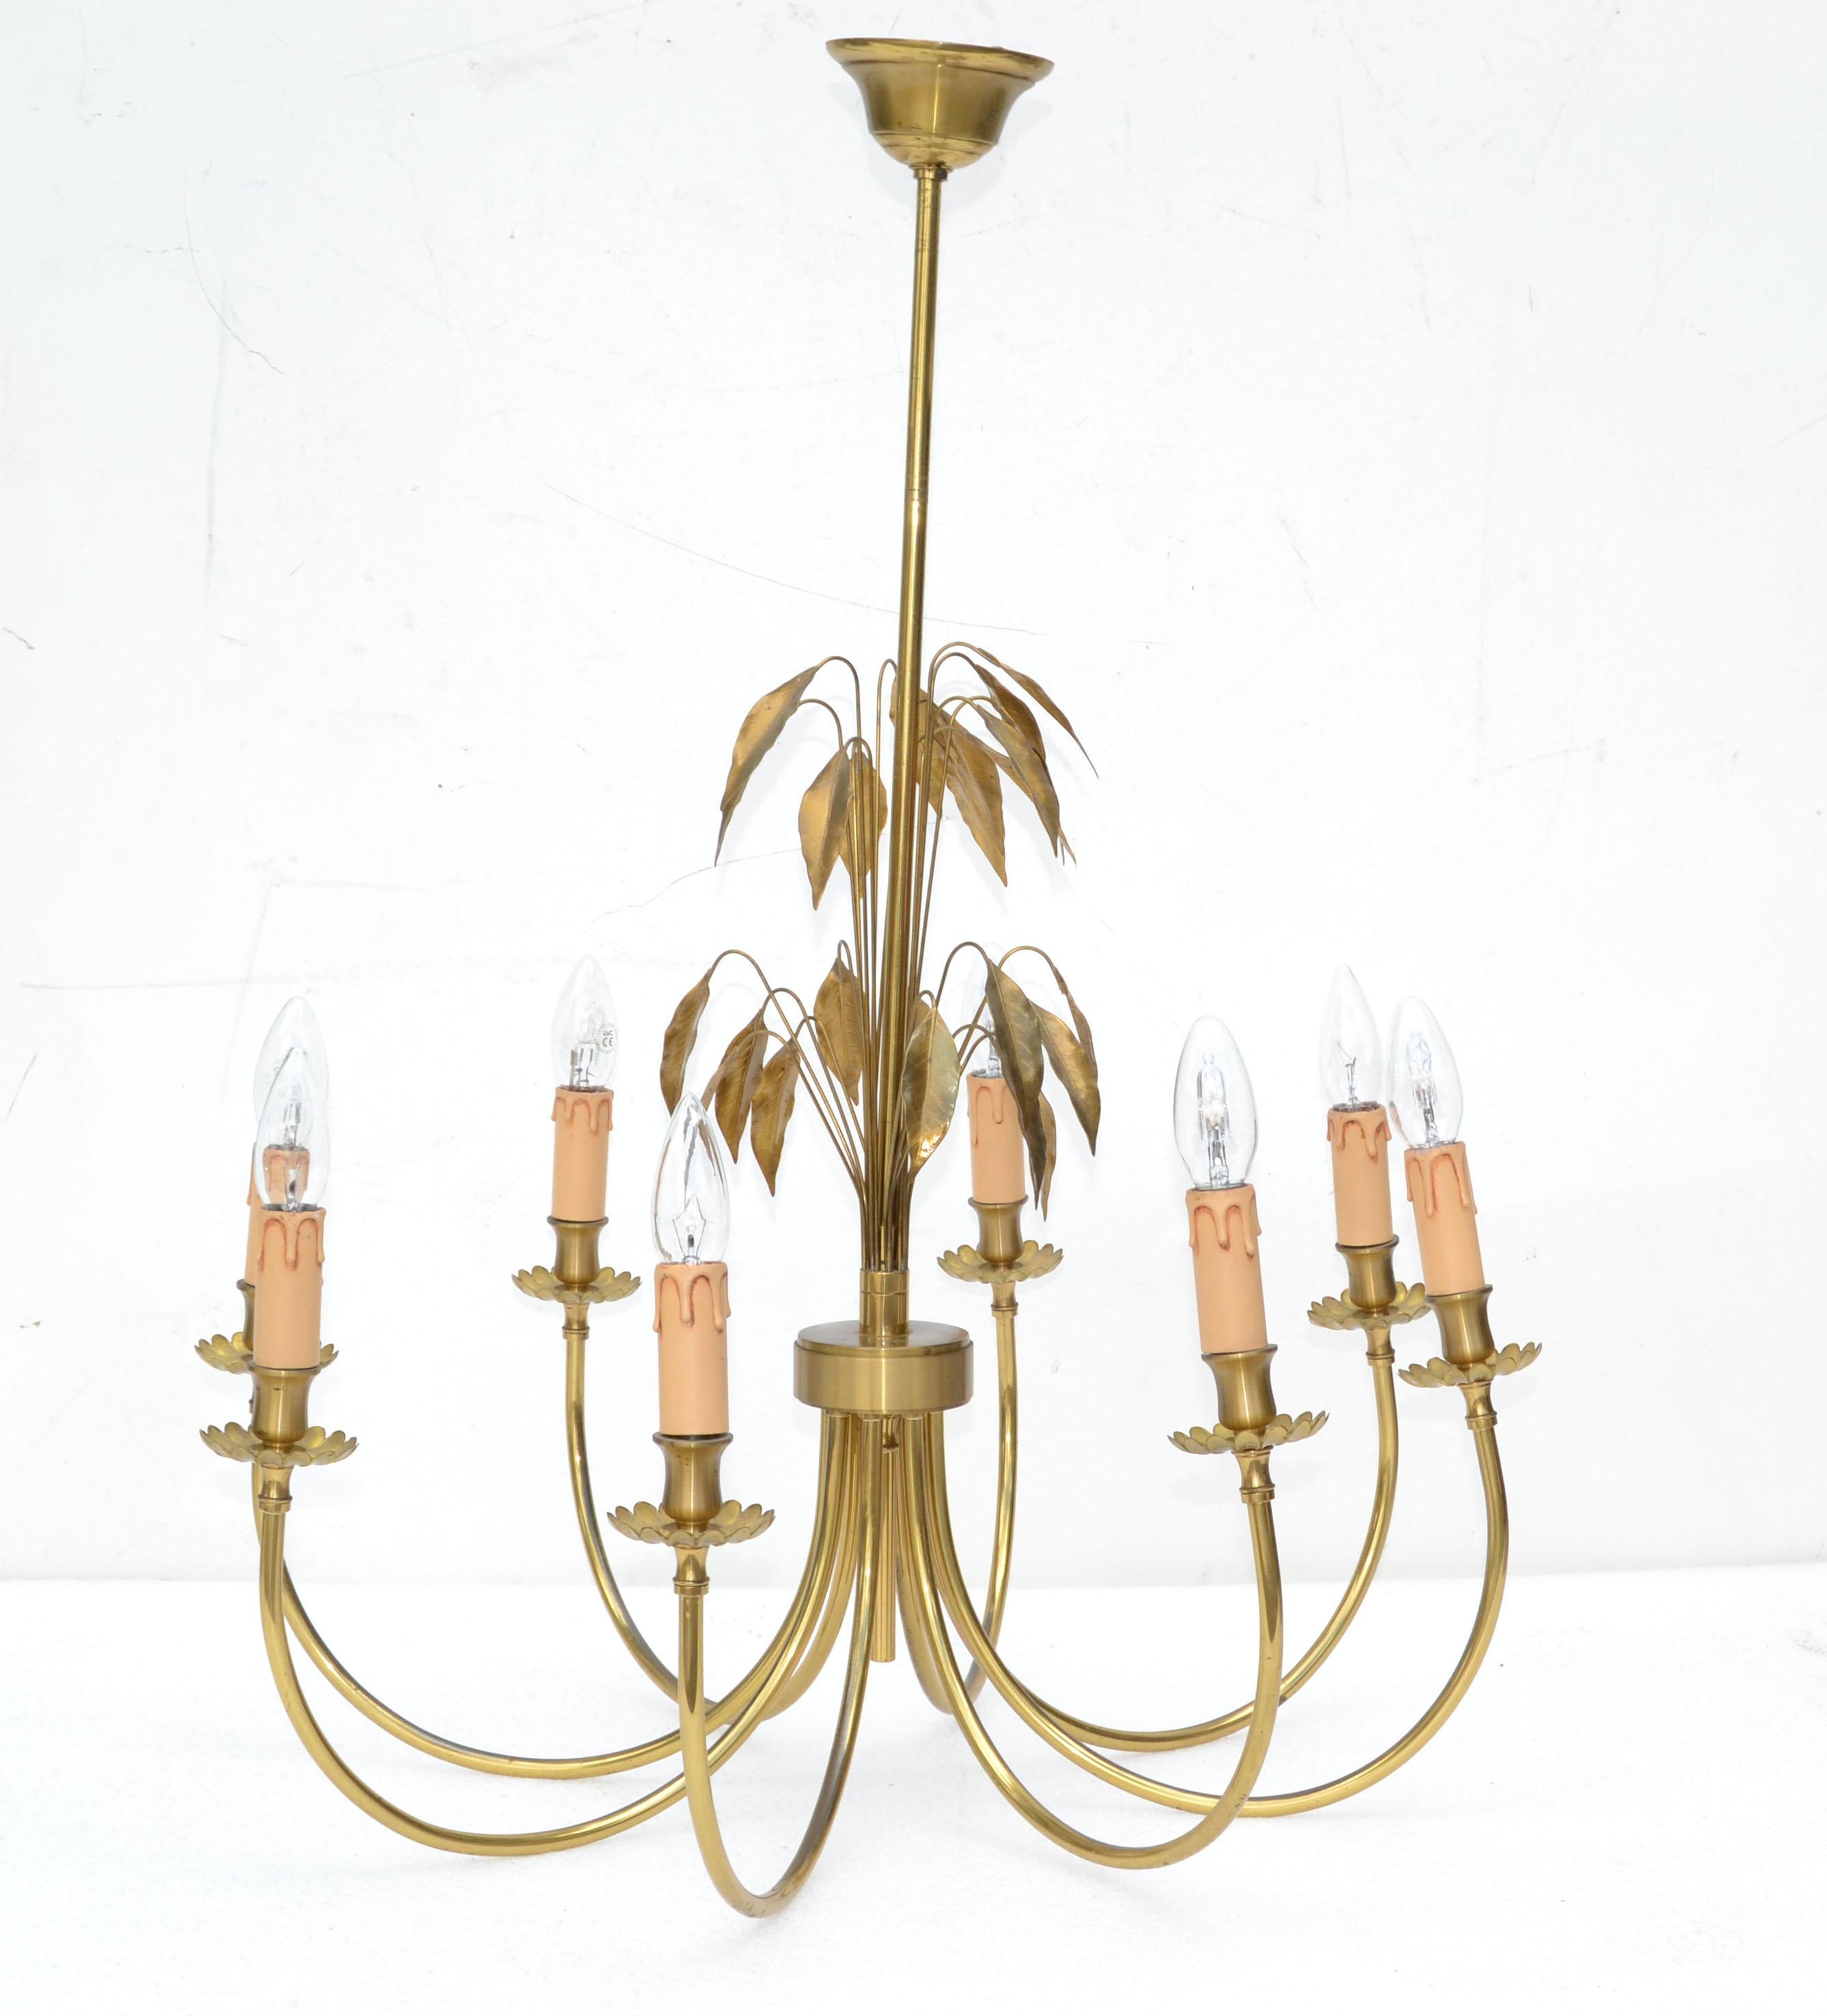 Maison Charles style 8 light chandelier 'Feuilles', brass & gold leaf branches in the center.
Comes with Canopy and takes 8 candelabra E14 light bulbs, max 40 watts.
In all original Condition with the French Wiring. 

 
 